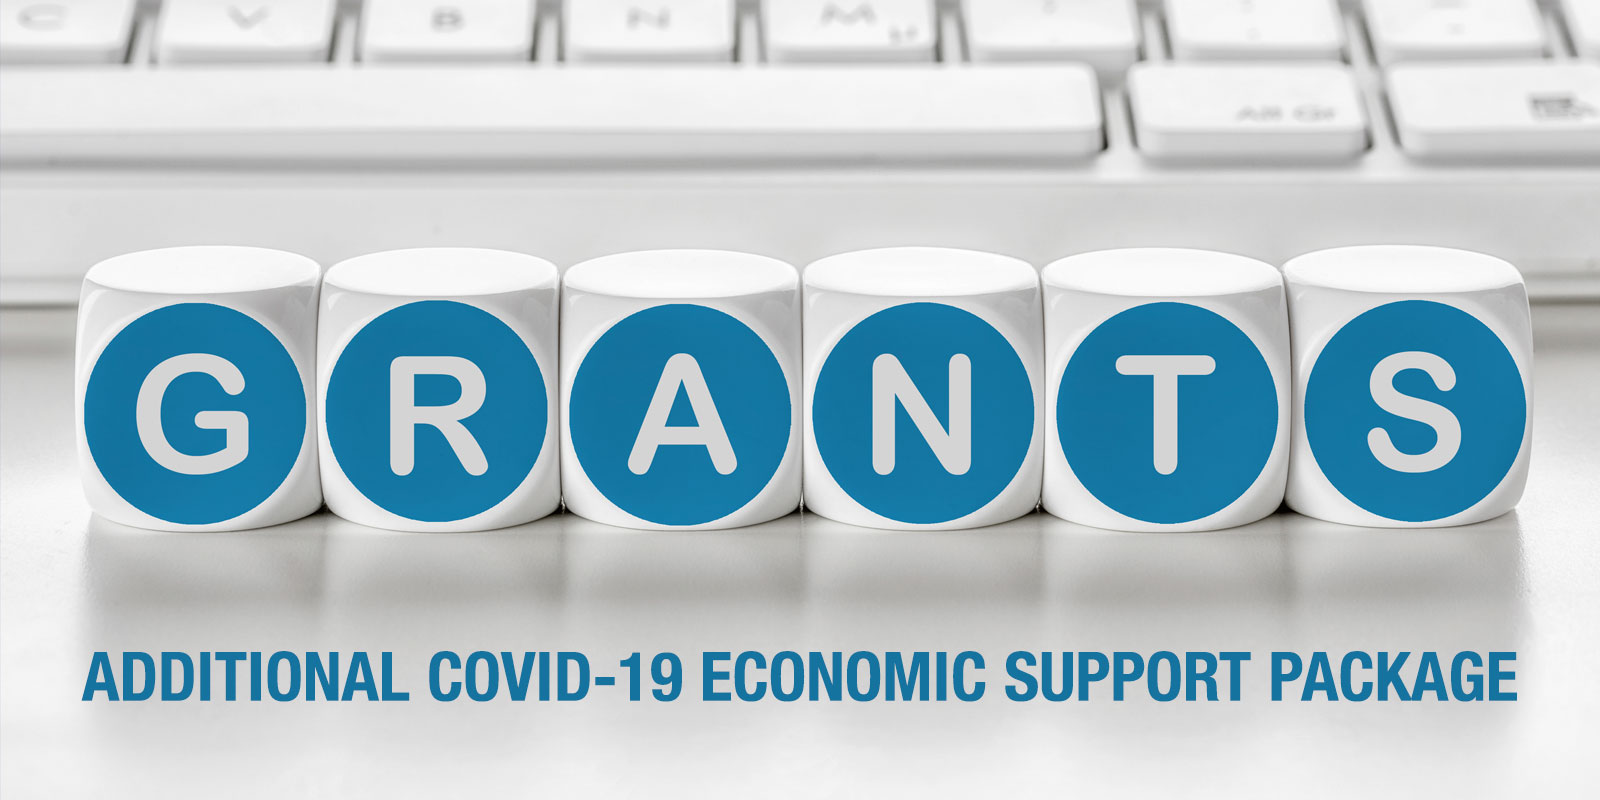 Additional COVID-19 Economic Support Packages